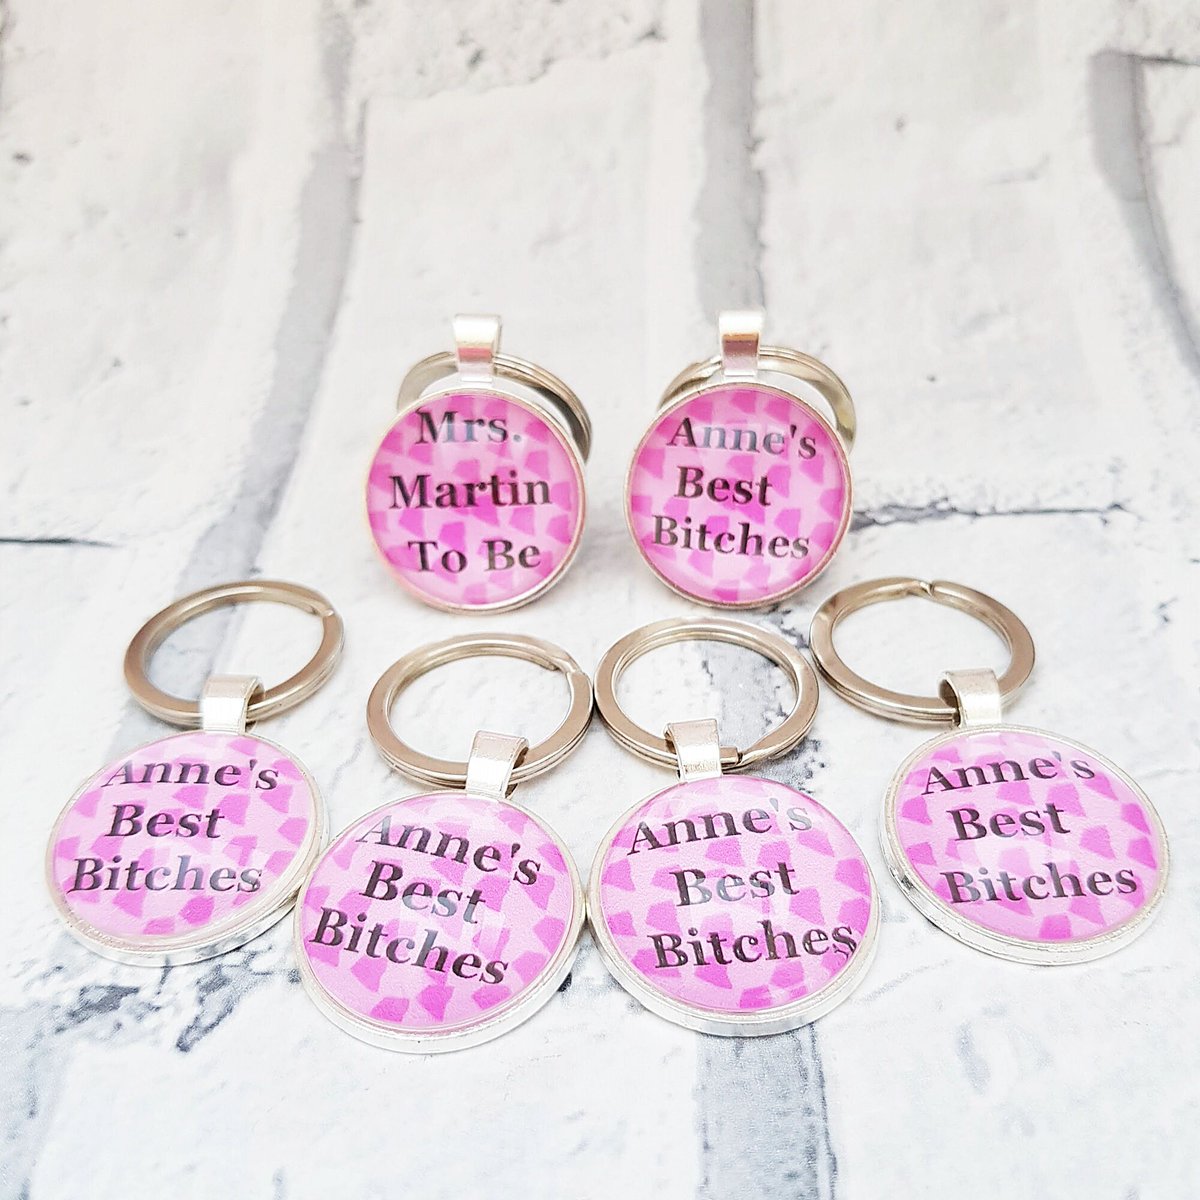 Custom hen party favours, hen party gift, bride to be keychain, keyring, bachelorette favour, wedding favour, best bitches, team bride, W1 tuppu.net/cd2647ab #Handmade #Etsy #SMILEtt23 #Shopsmall #CustomHenParty